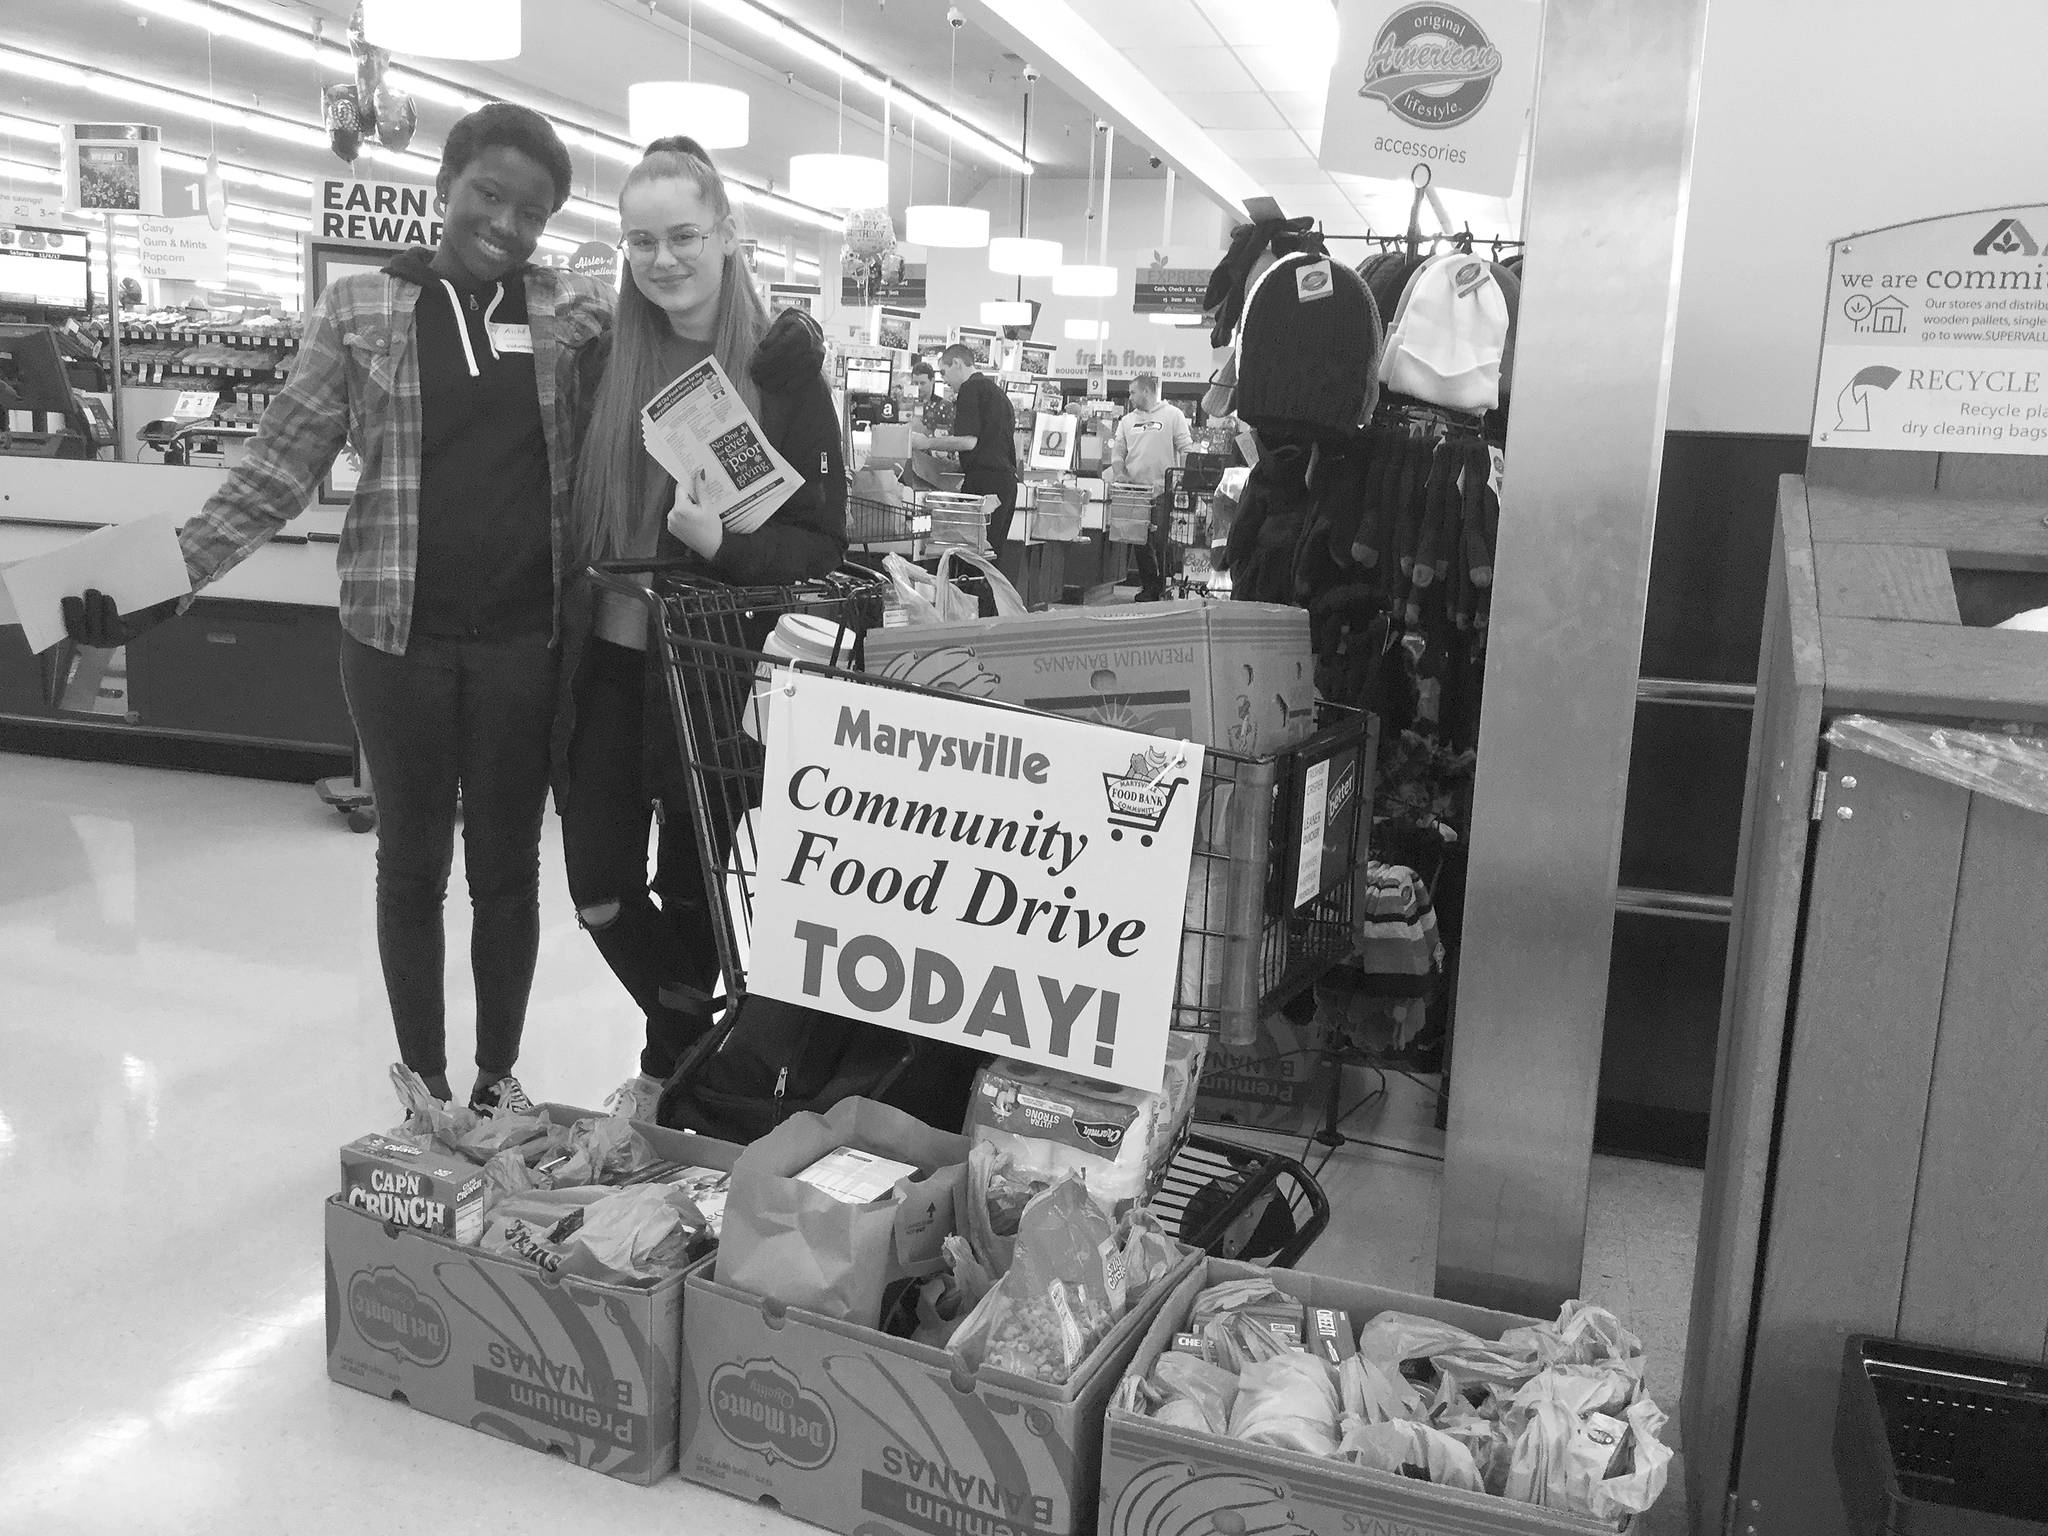 Aiche Danioko and Goda Katkute collect donations at the Albertsons during the All City Food Drive Nov. 4.